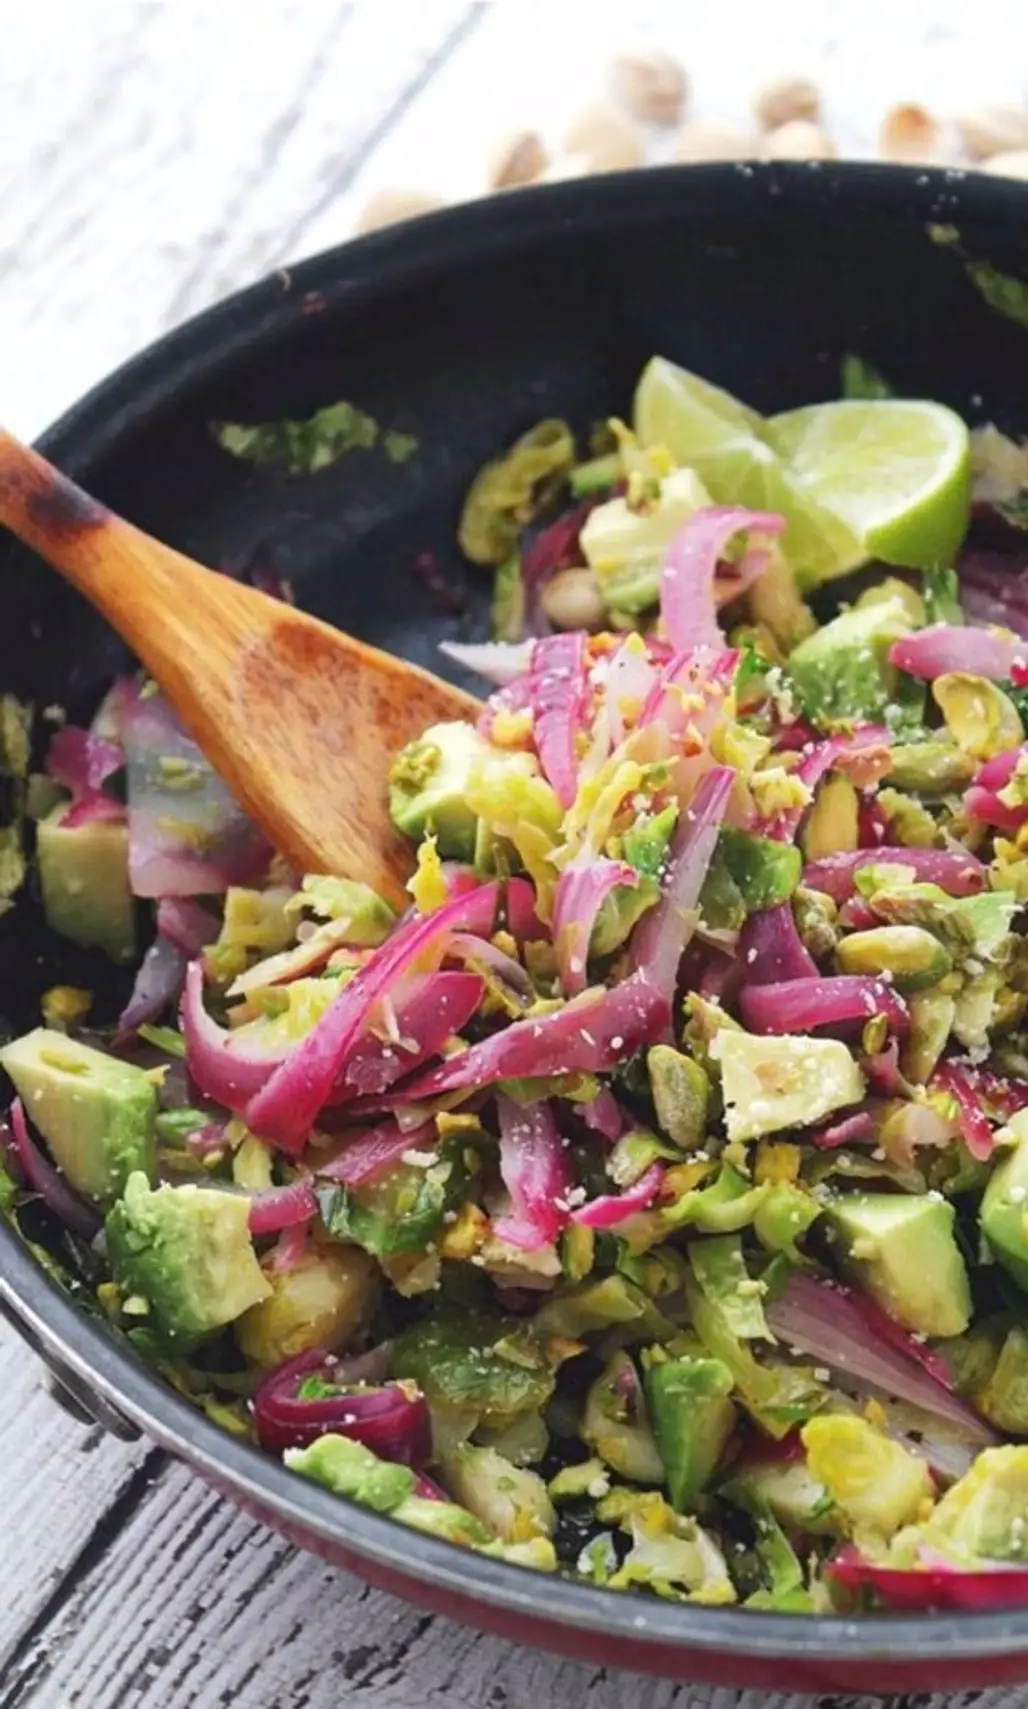 Sauteed Salad Packed with Shaved Brussels Sprouts, Red Onions, Avocado, Pistachios and a Splash of Lime Juice